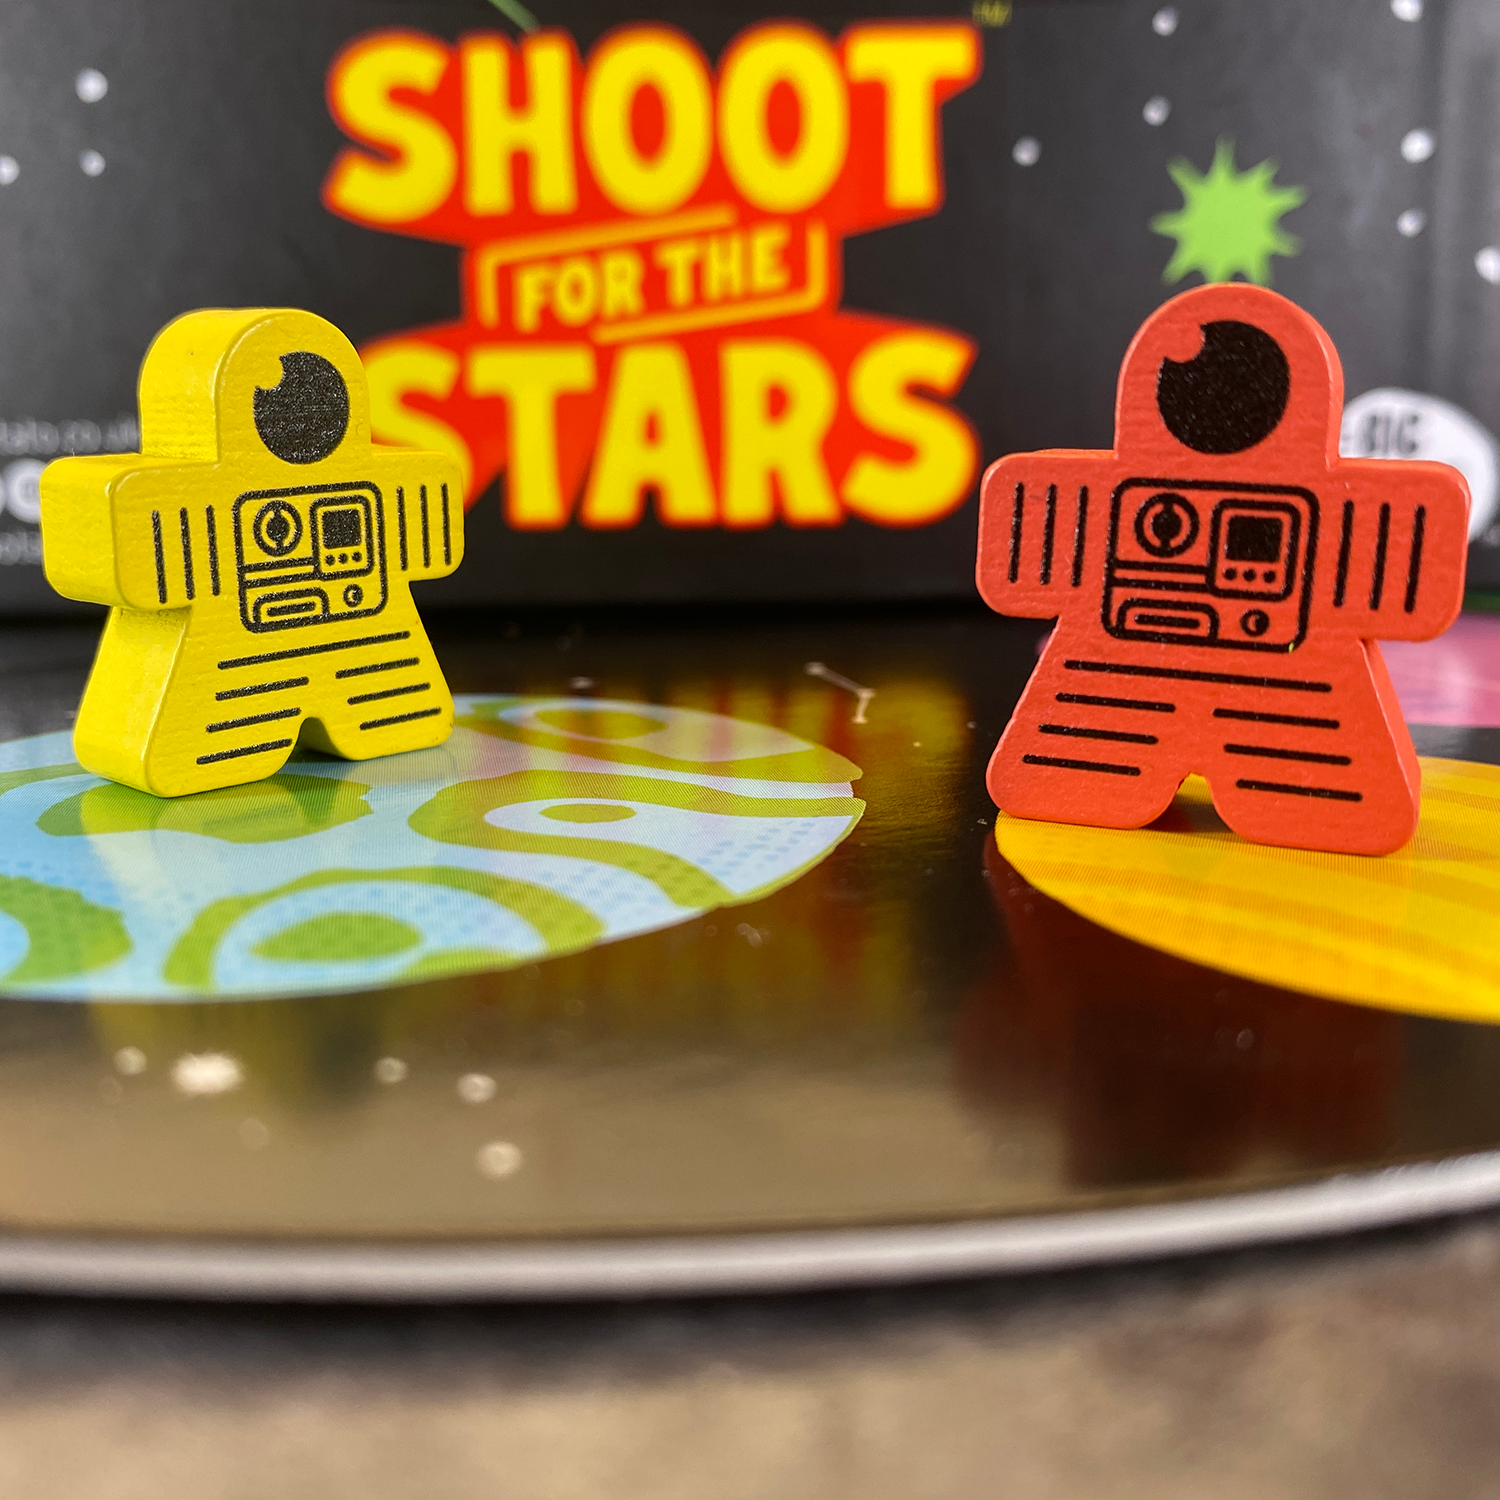 Shoot for the stars board game review